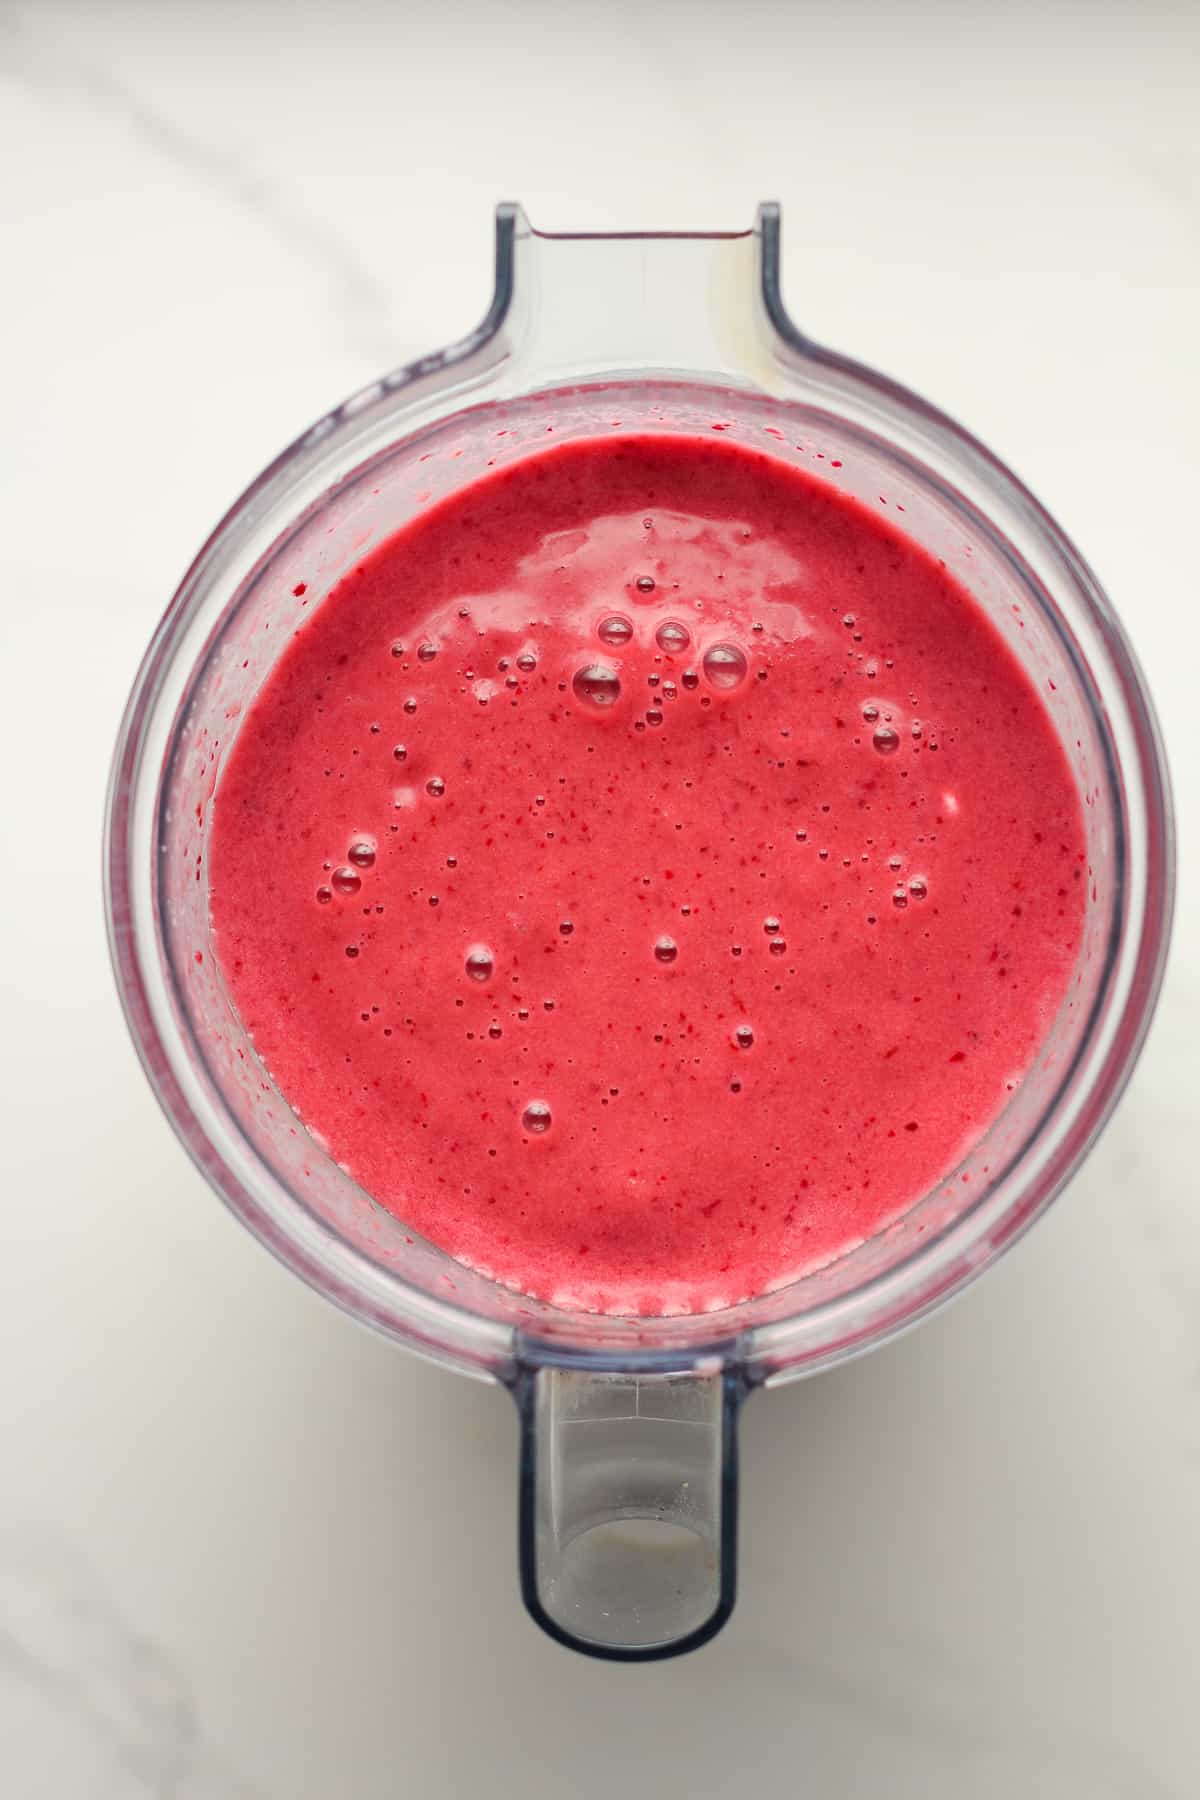 A pitcher of cherry smoothies in a blender.